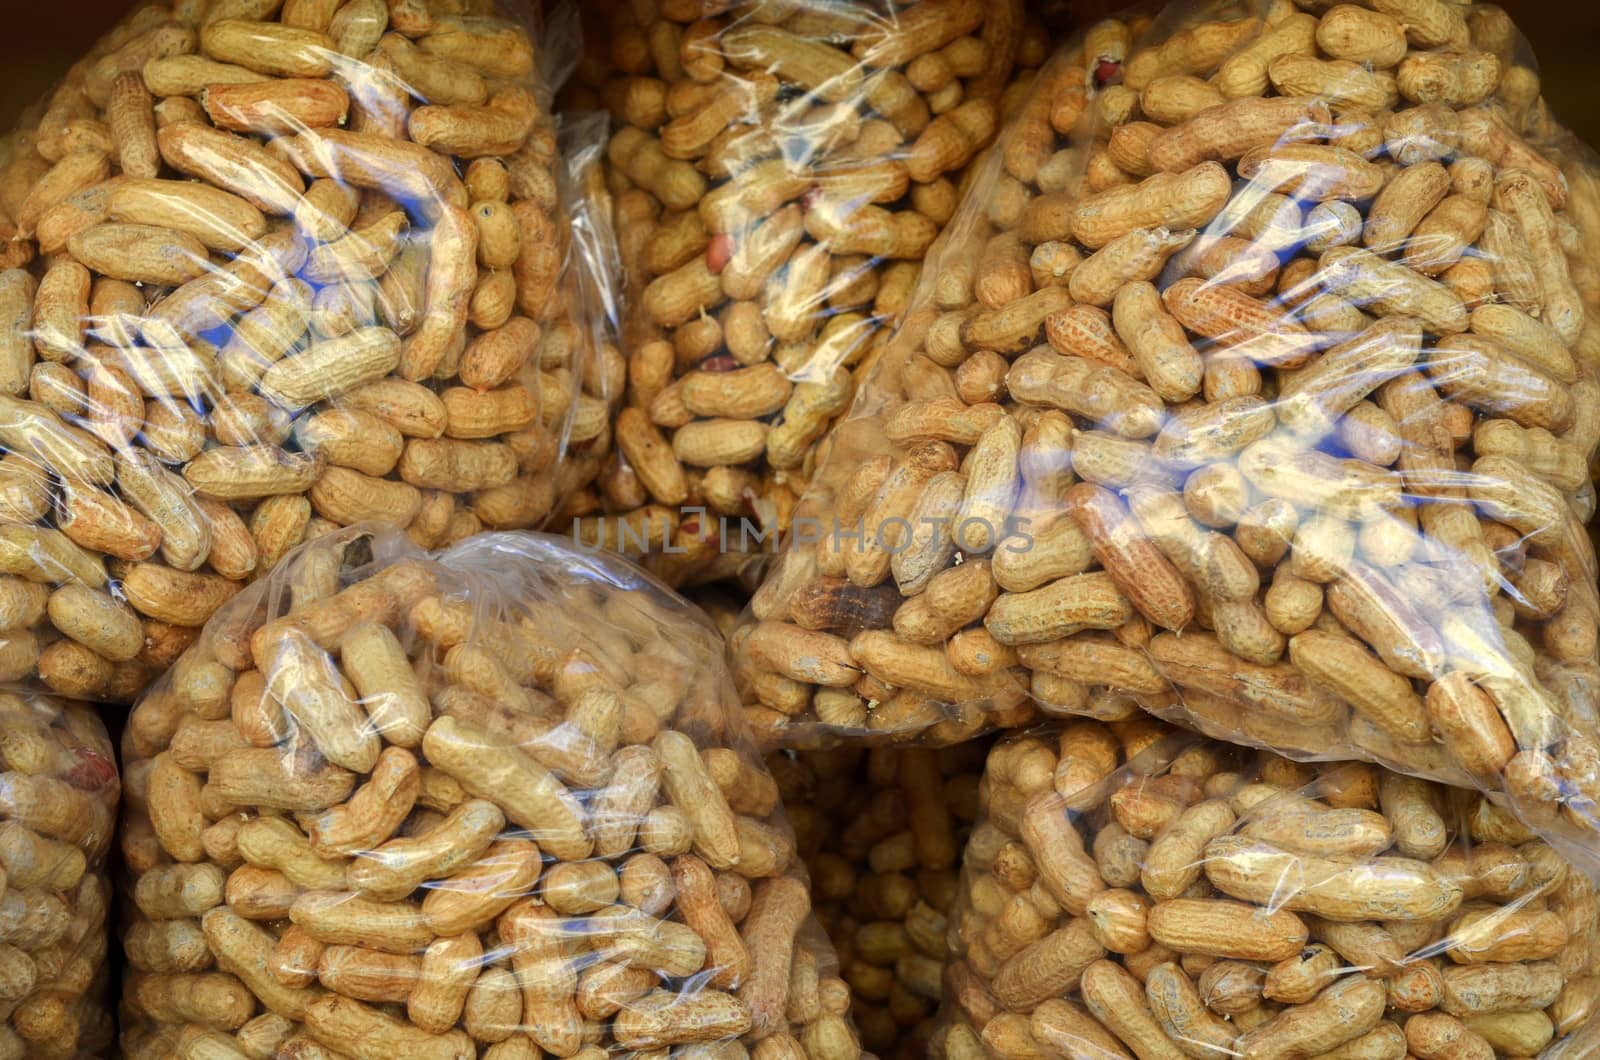 Background Food Image Of Bags Of Peanuts At A Market